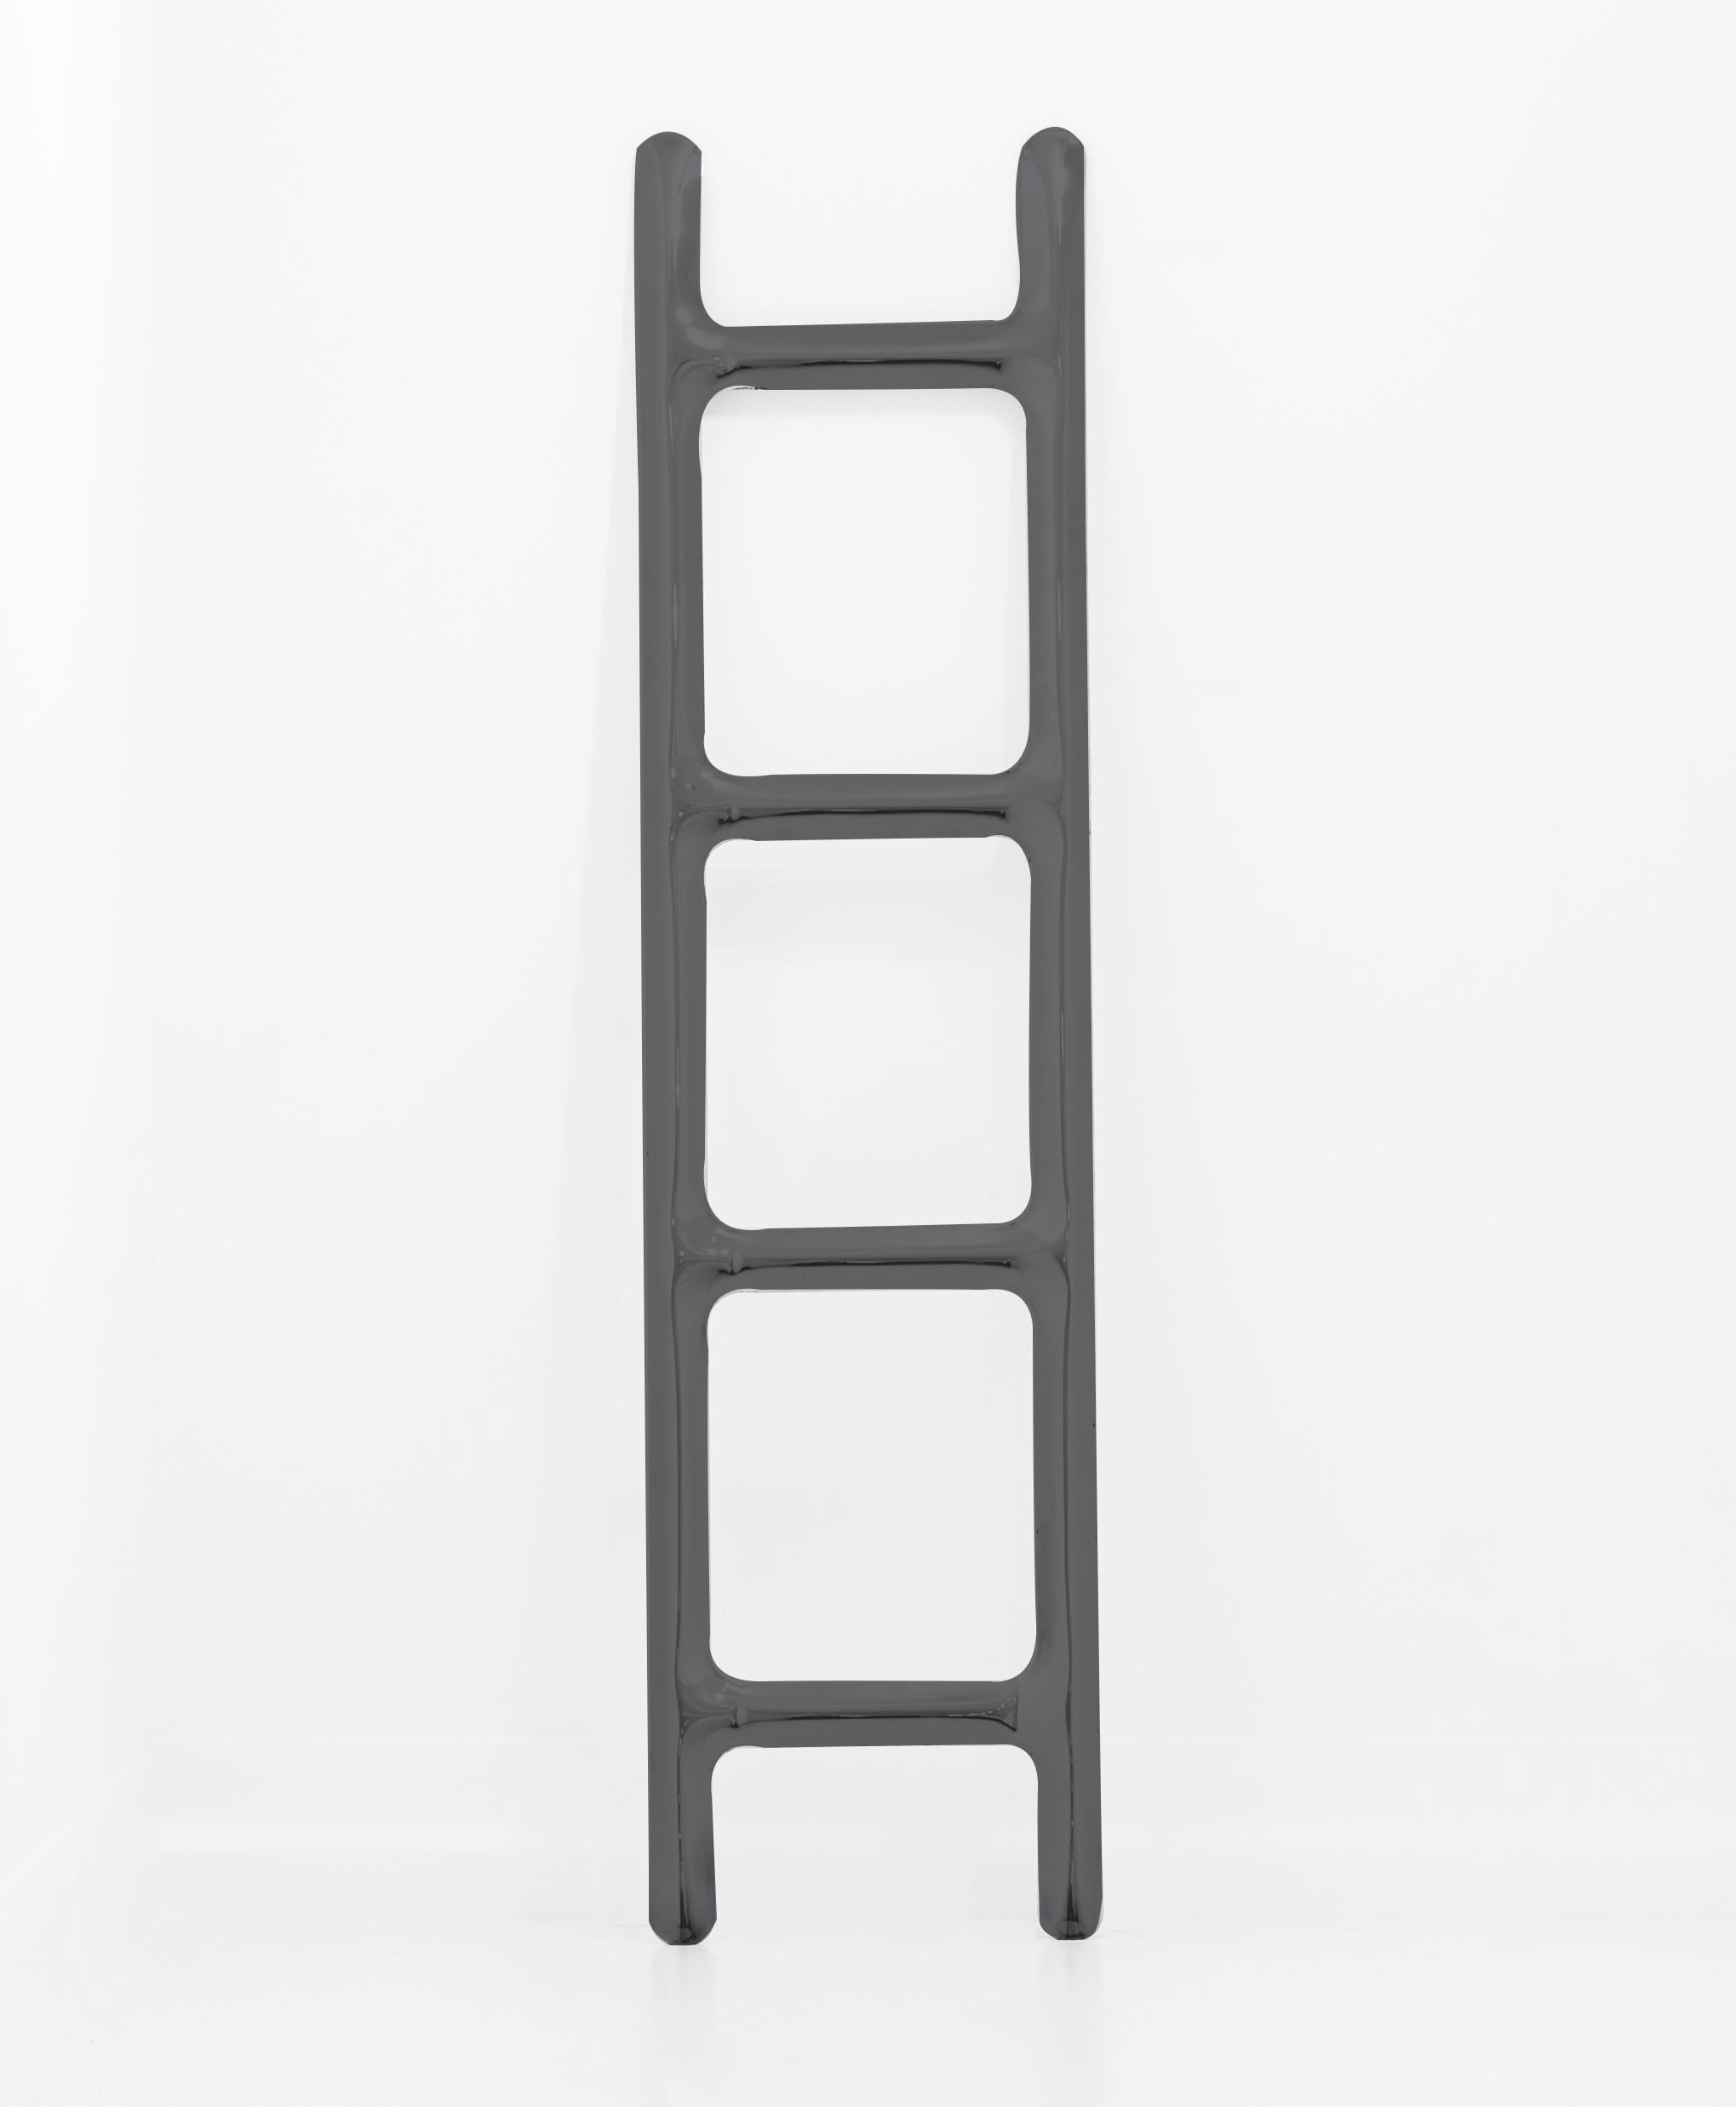 Drab mirror is a part of a Drab ladder family, a new function to an frame. 
The inflation effect not so obvious, yet it is highlighted in the convexity this simple form.